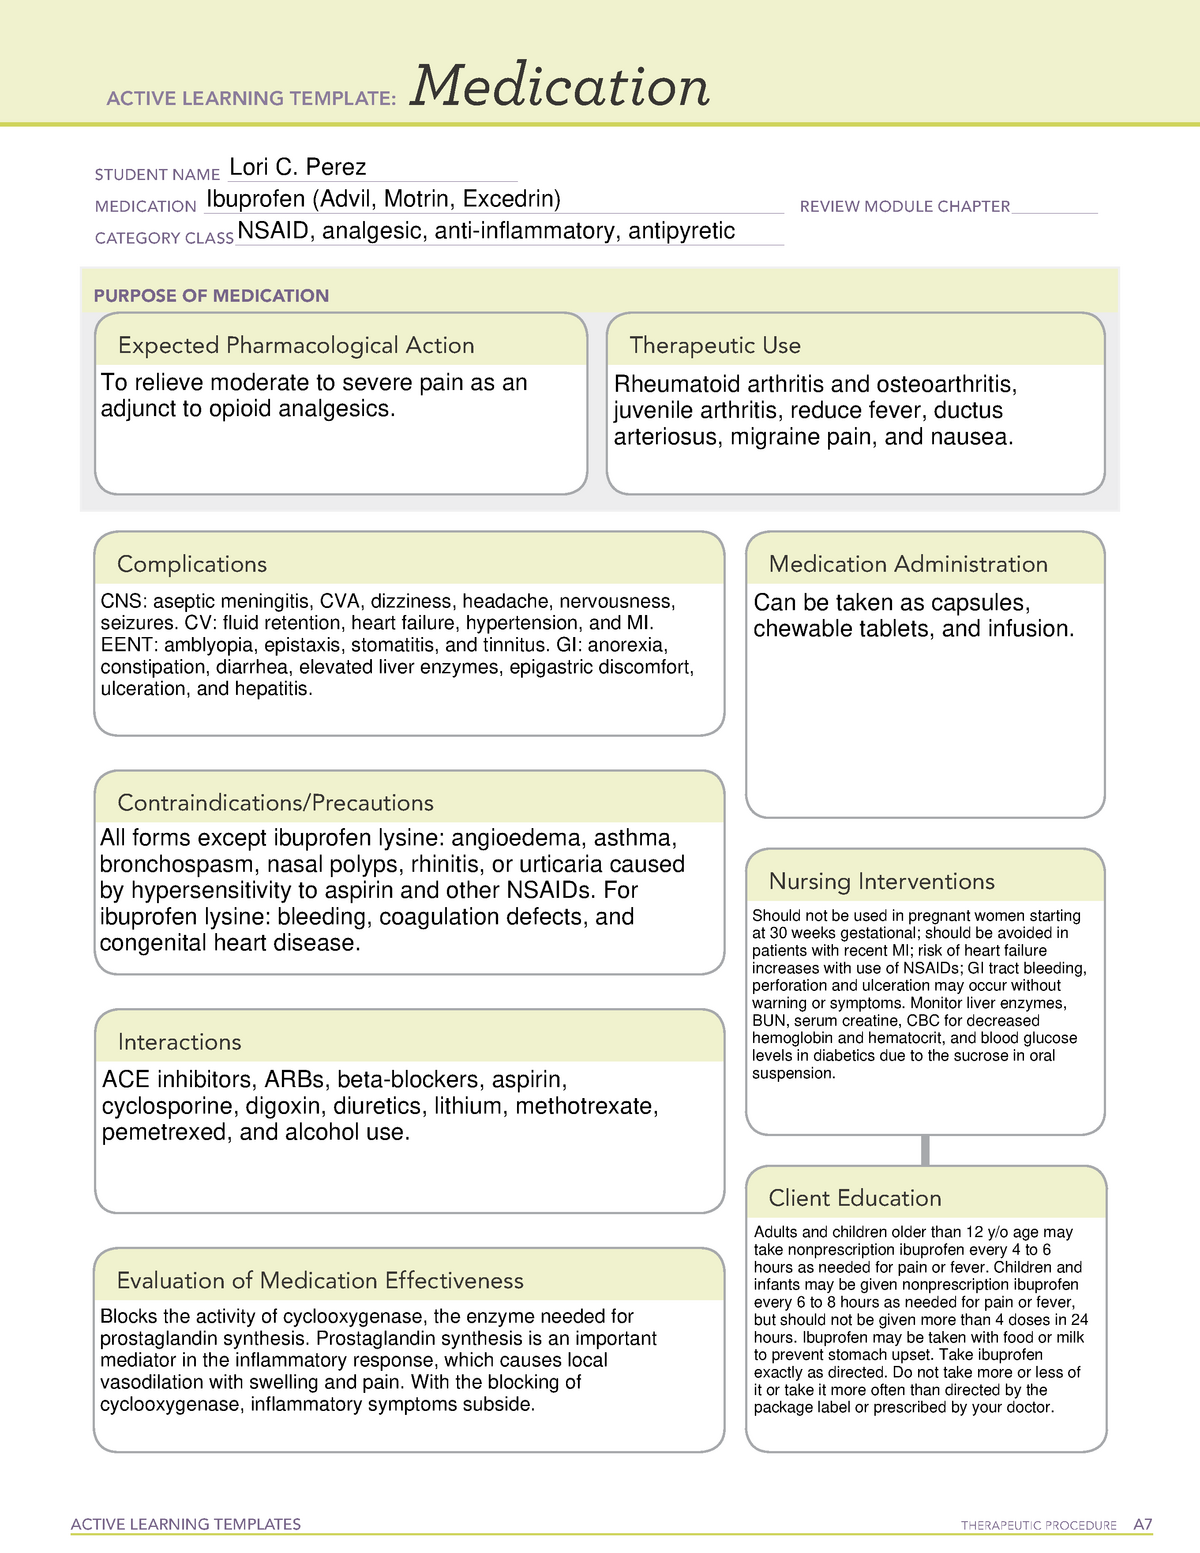 Med Card Ibuprofen Completed template ACTIVE LEARNING TEMPLATES